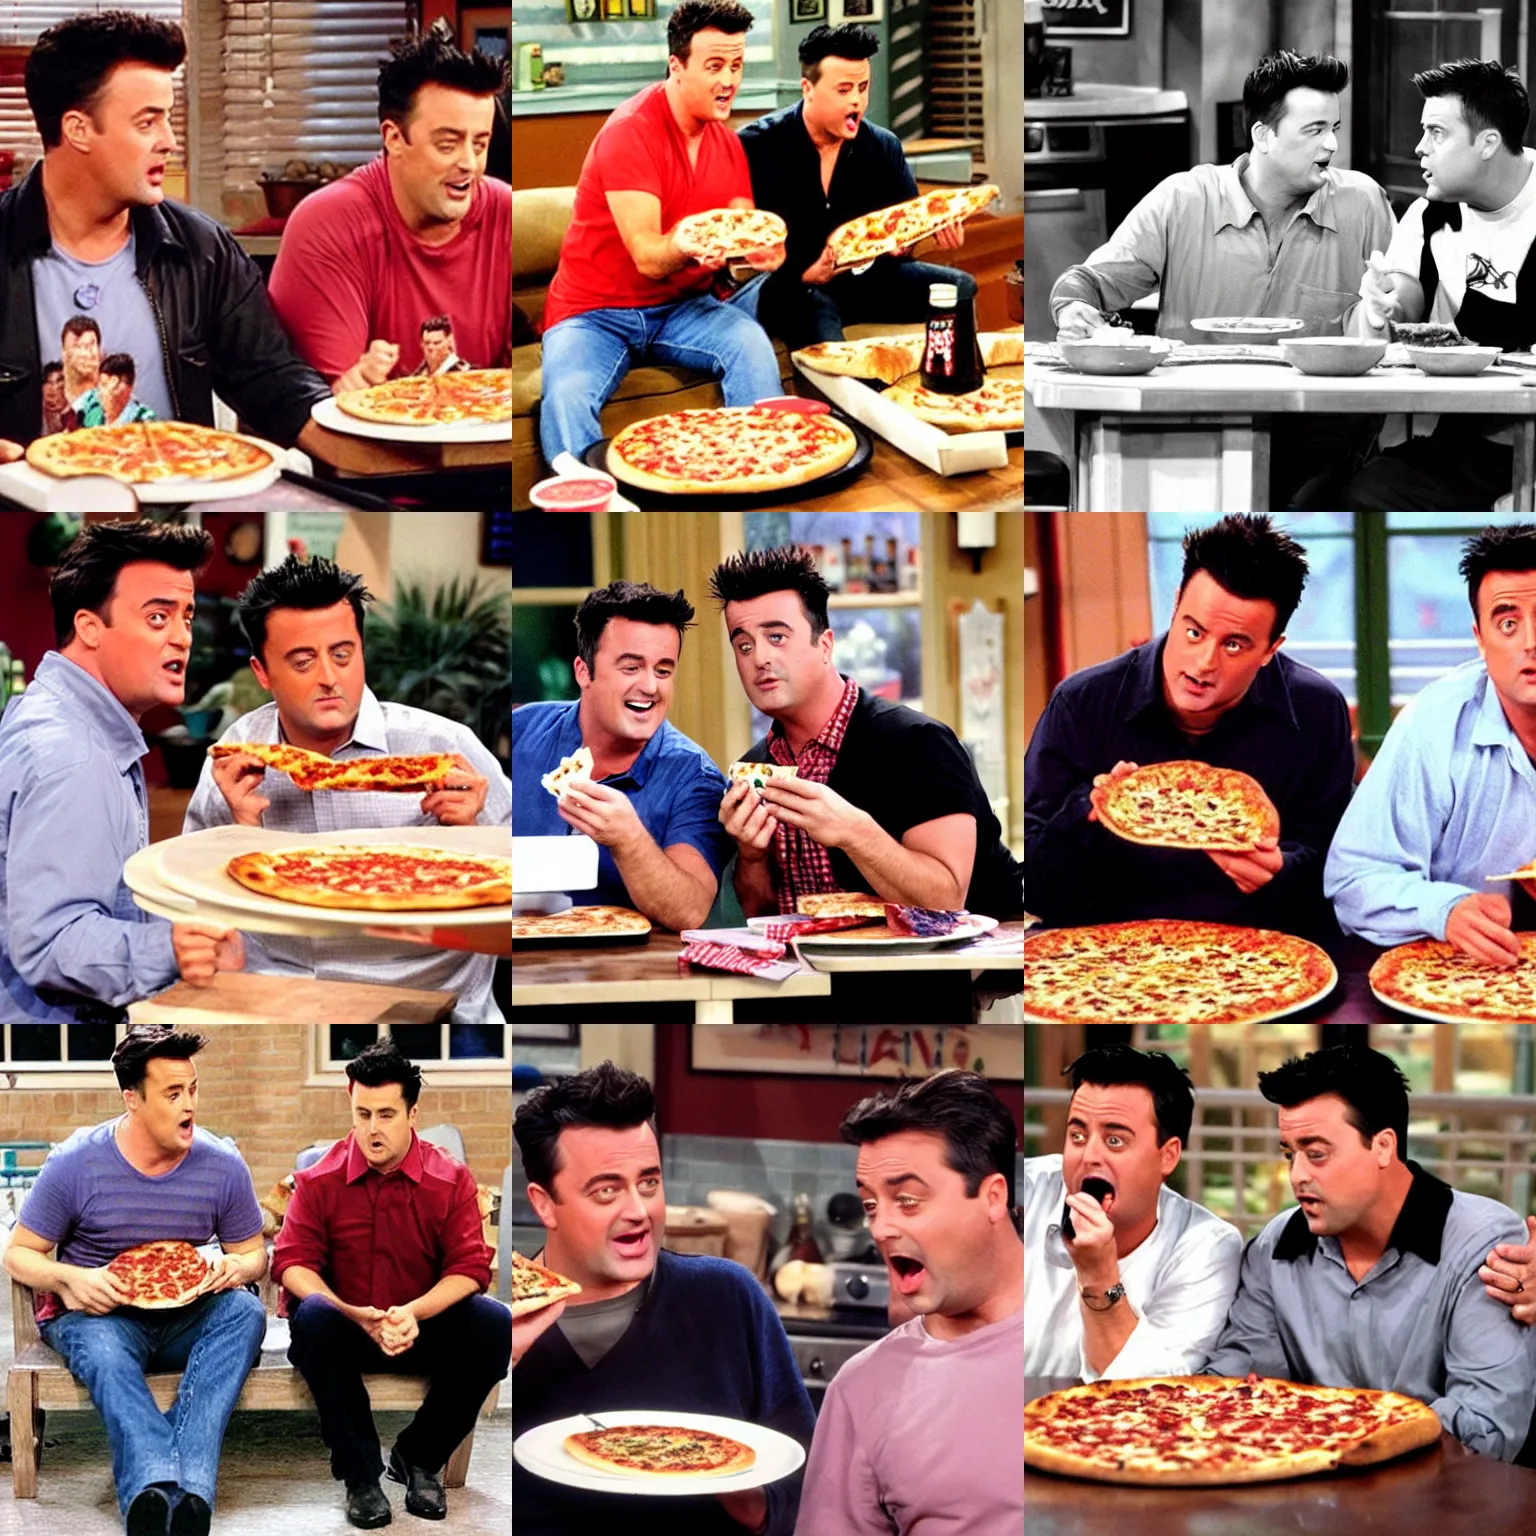 young Matthew Perry eating pizza, 'friends' tv show, Stable Diffusion